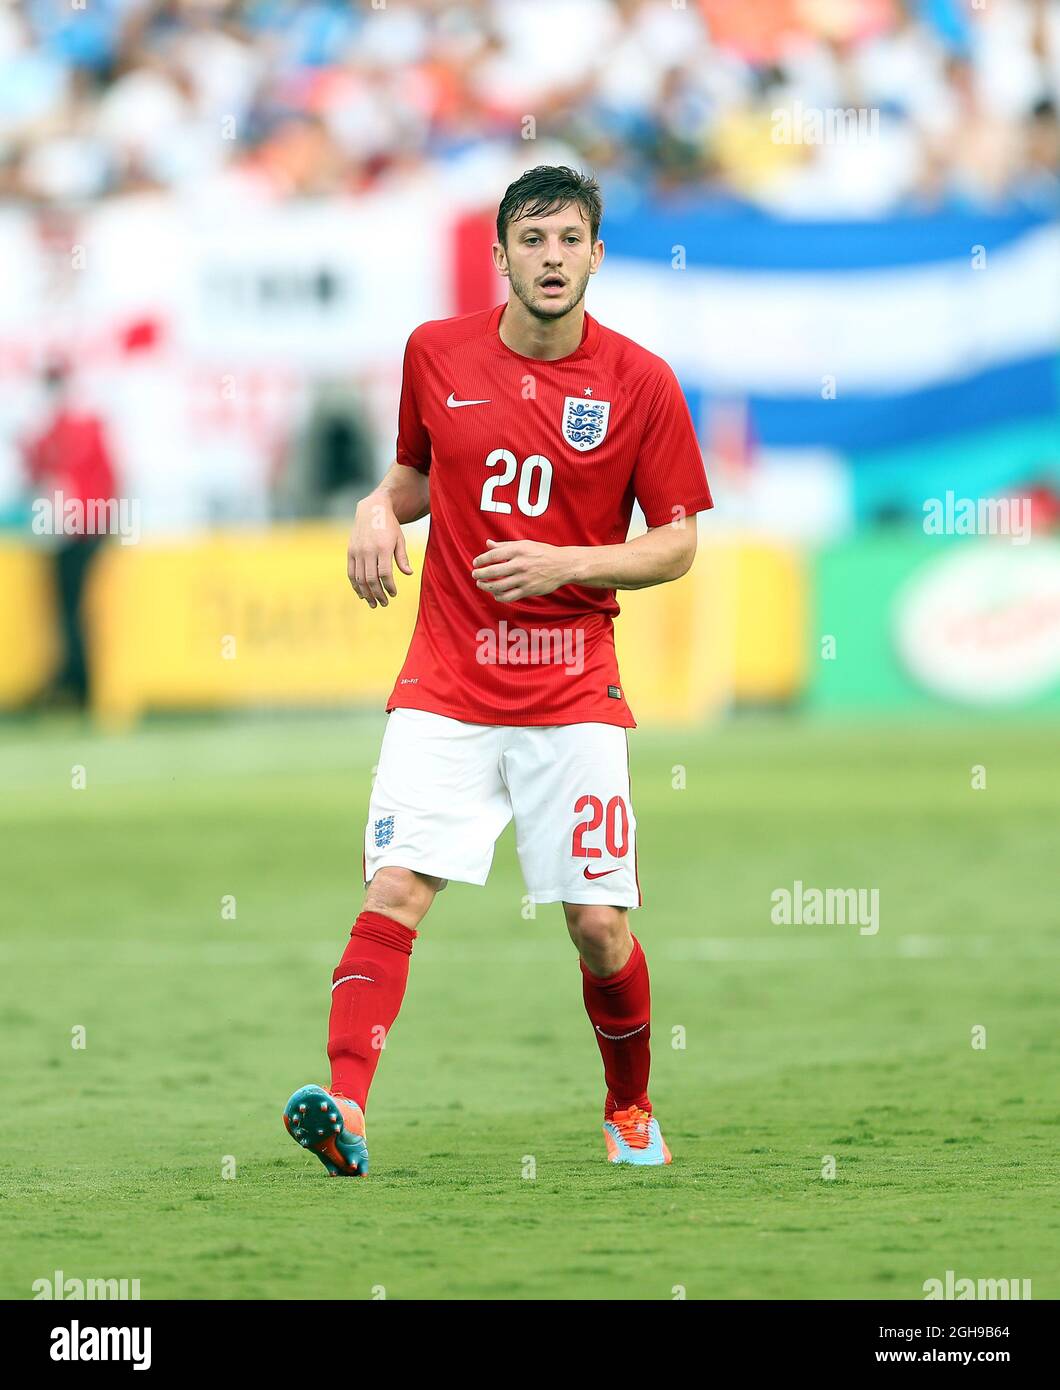 England's Adam Lallana in action during the international friendly soccer match between England and Honduras at Sun Life Stadium in Miami, Florida on June 7, 2014. Pic David Klein. Stock Photo